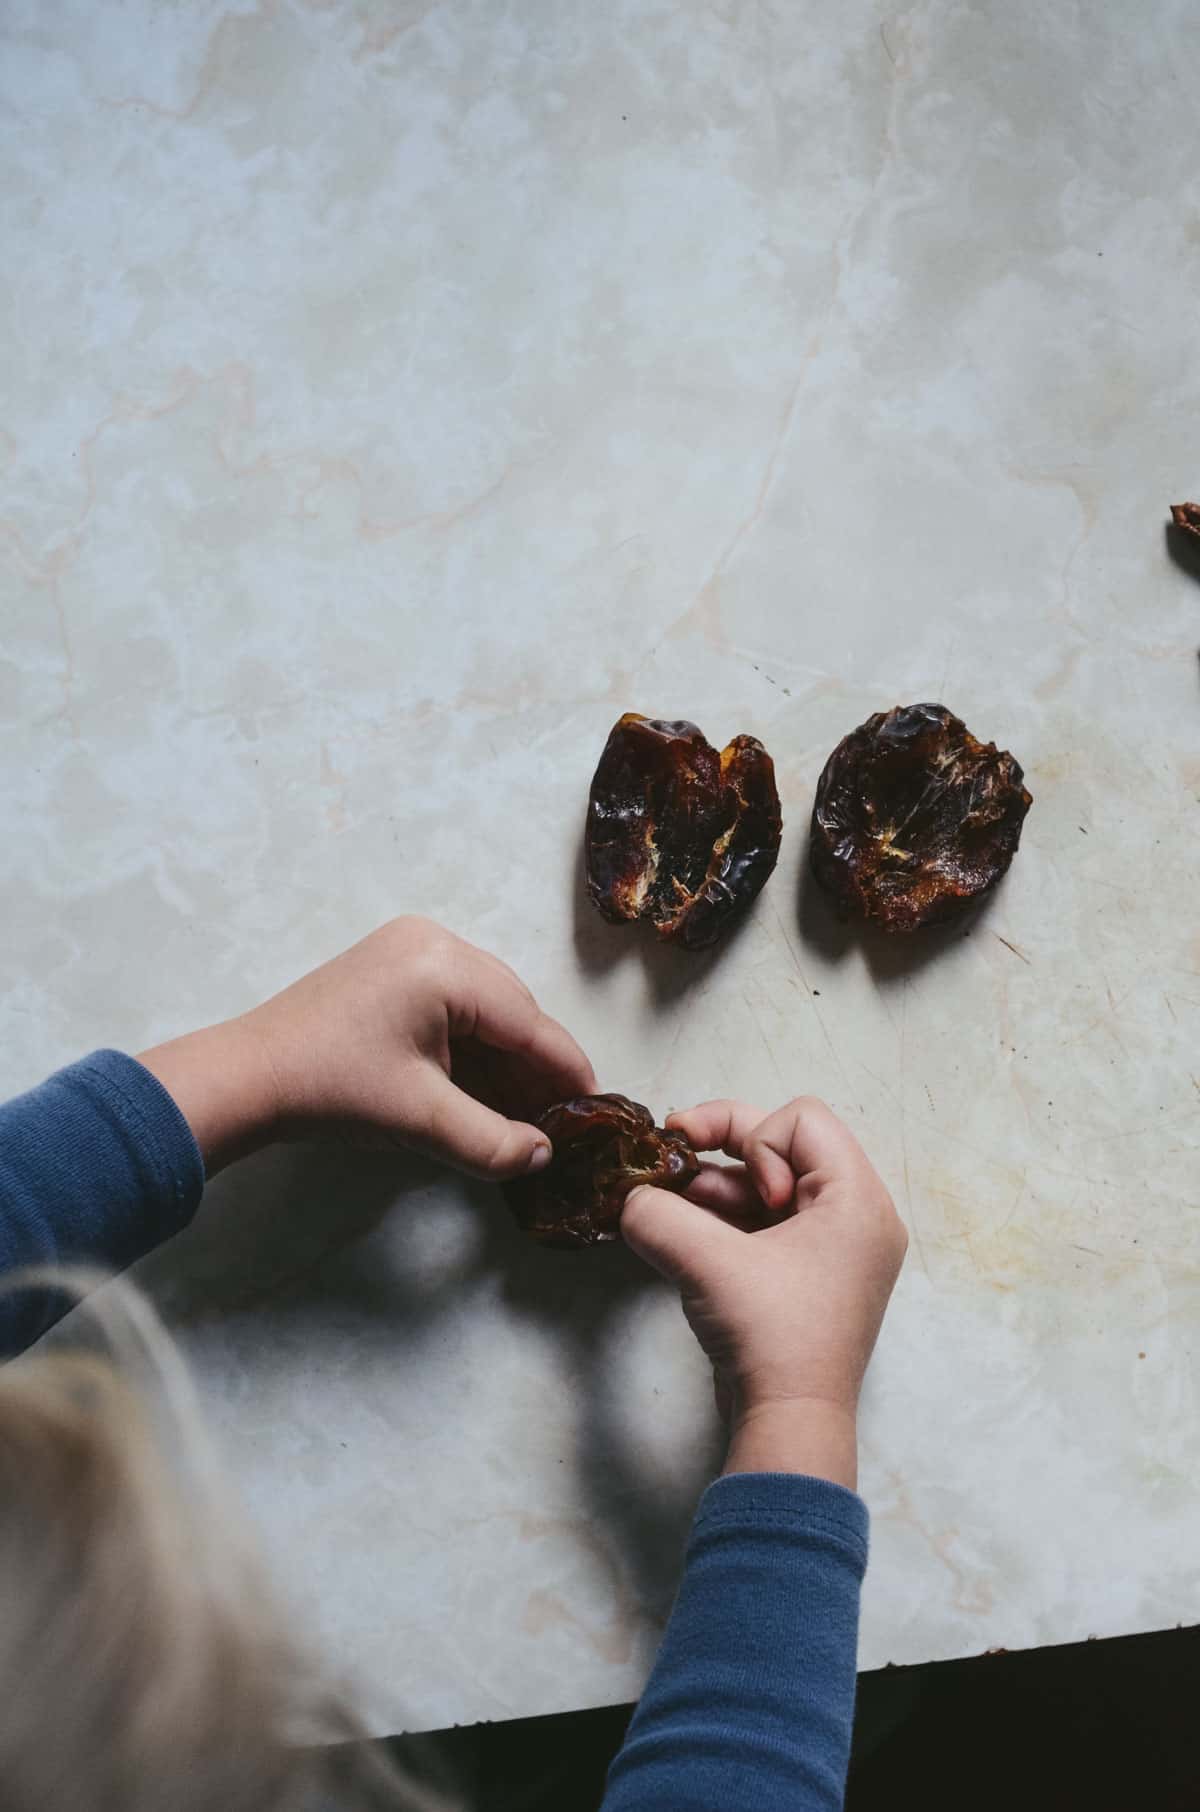 Toddlers hands removing pit from dates.